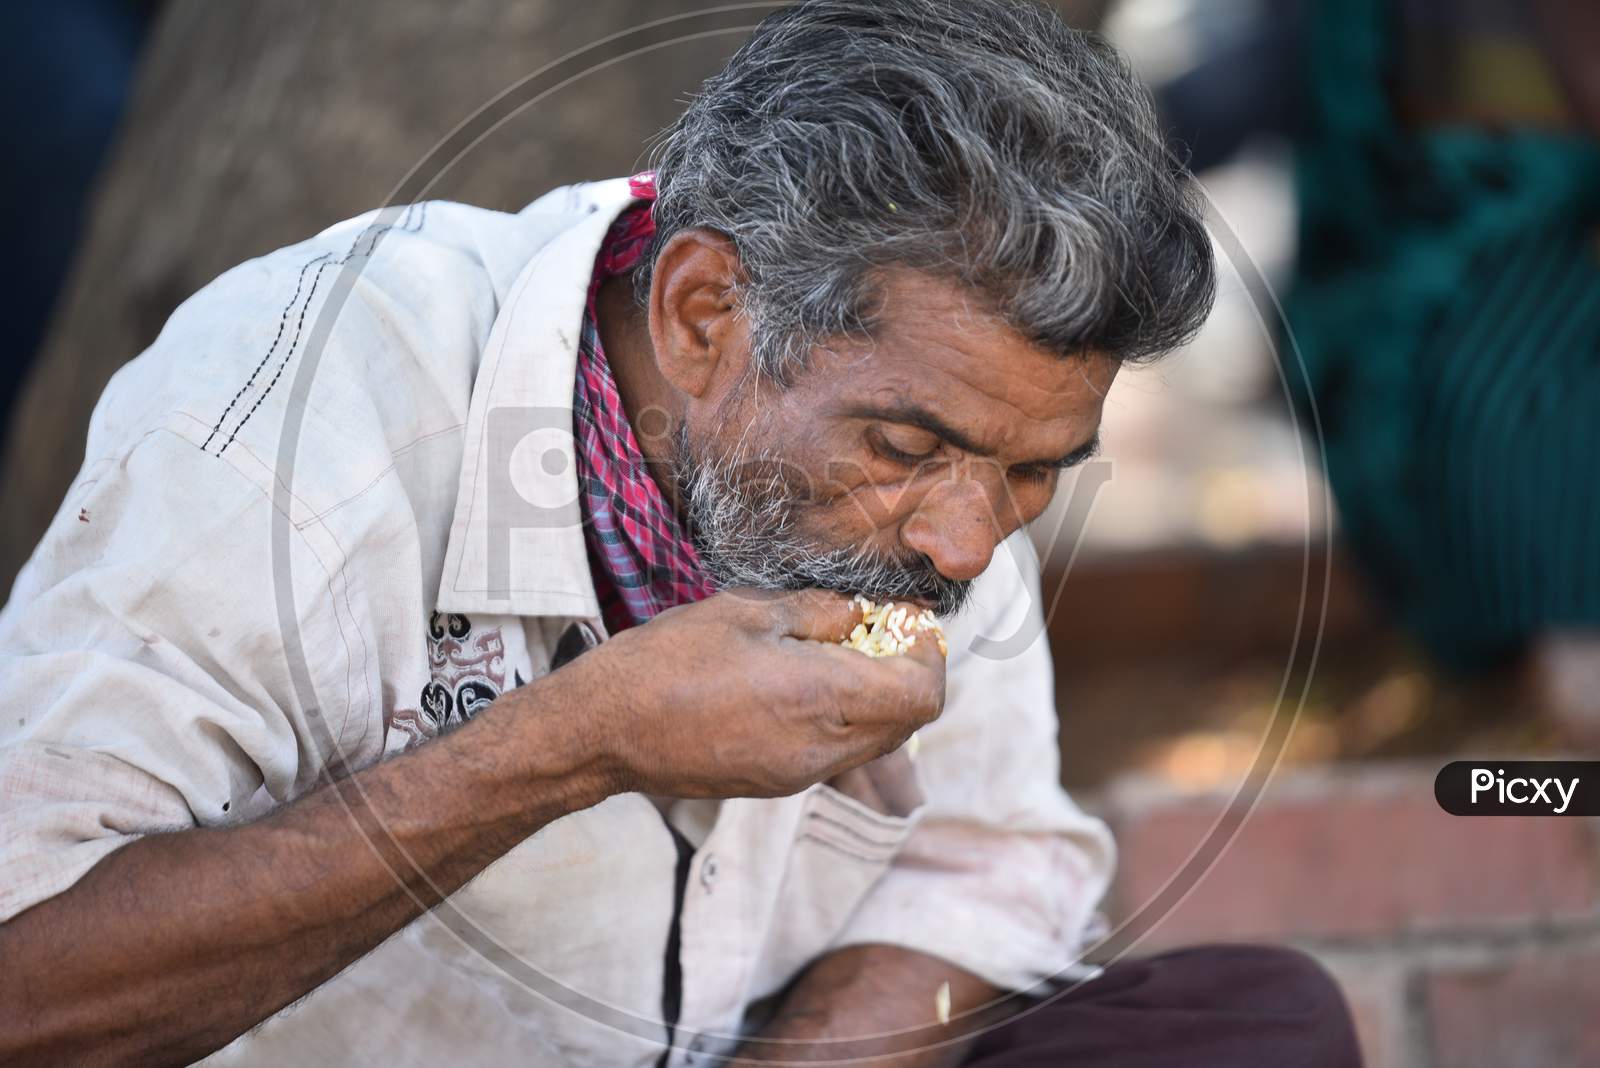 A migrant worker eating food from a free food distribution centre GHMC,Annapurna in Madhapur amid nationwide lockdown due to Coronavirus Pandemic, April 10,2020, COVID19